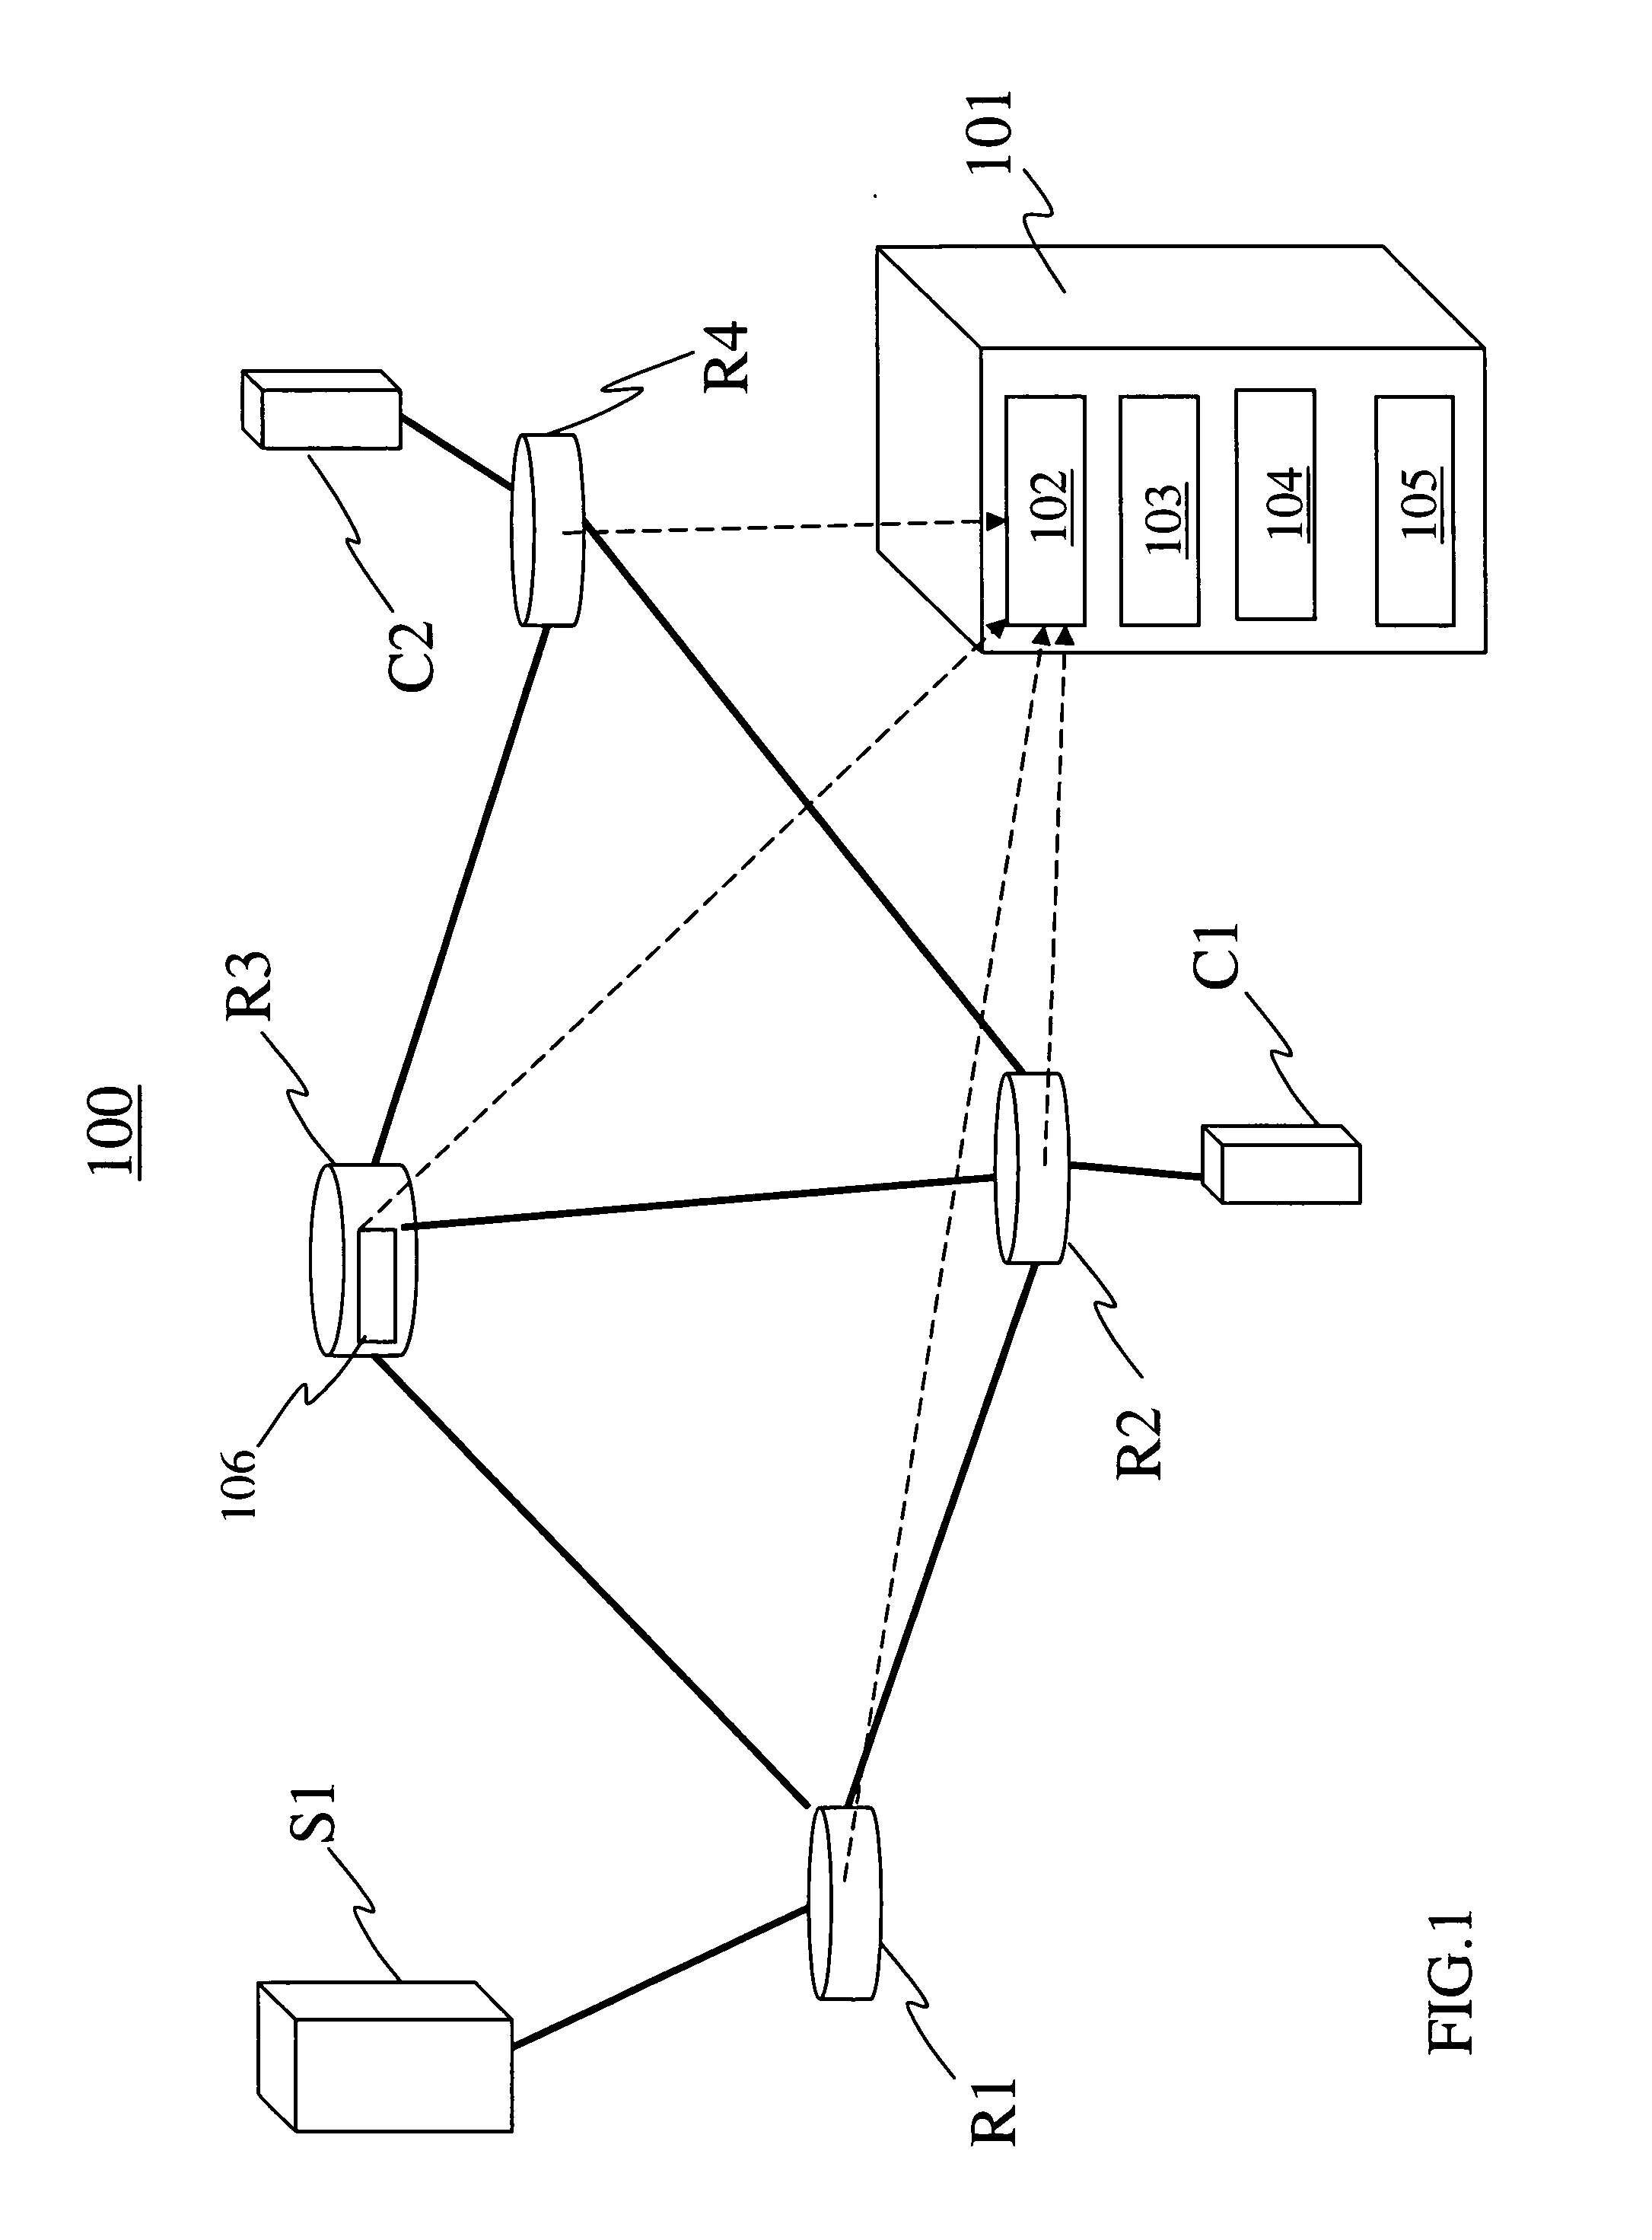 Method of detecting anomalies in a communication system using symbolic packet features